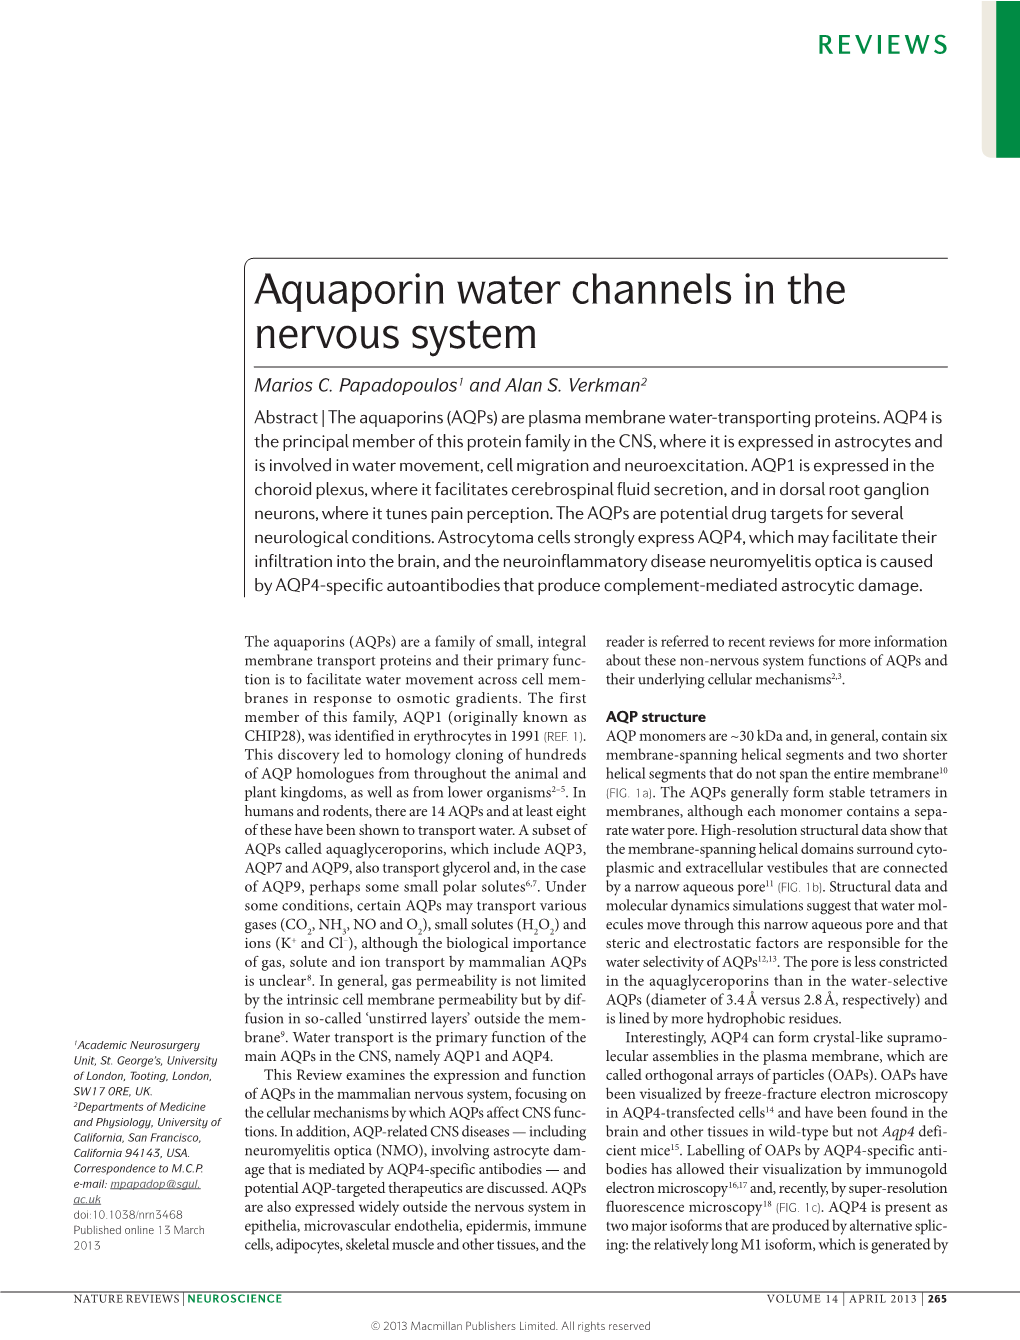 Aquaporin Water Channels in the Nervous System